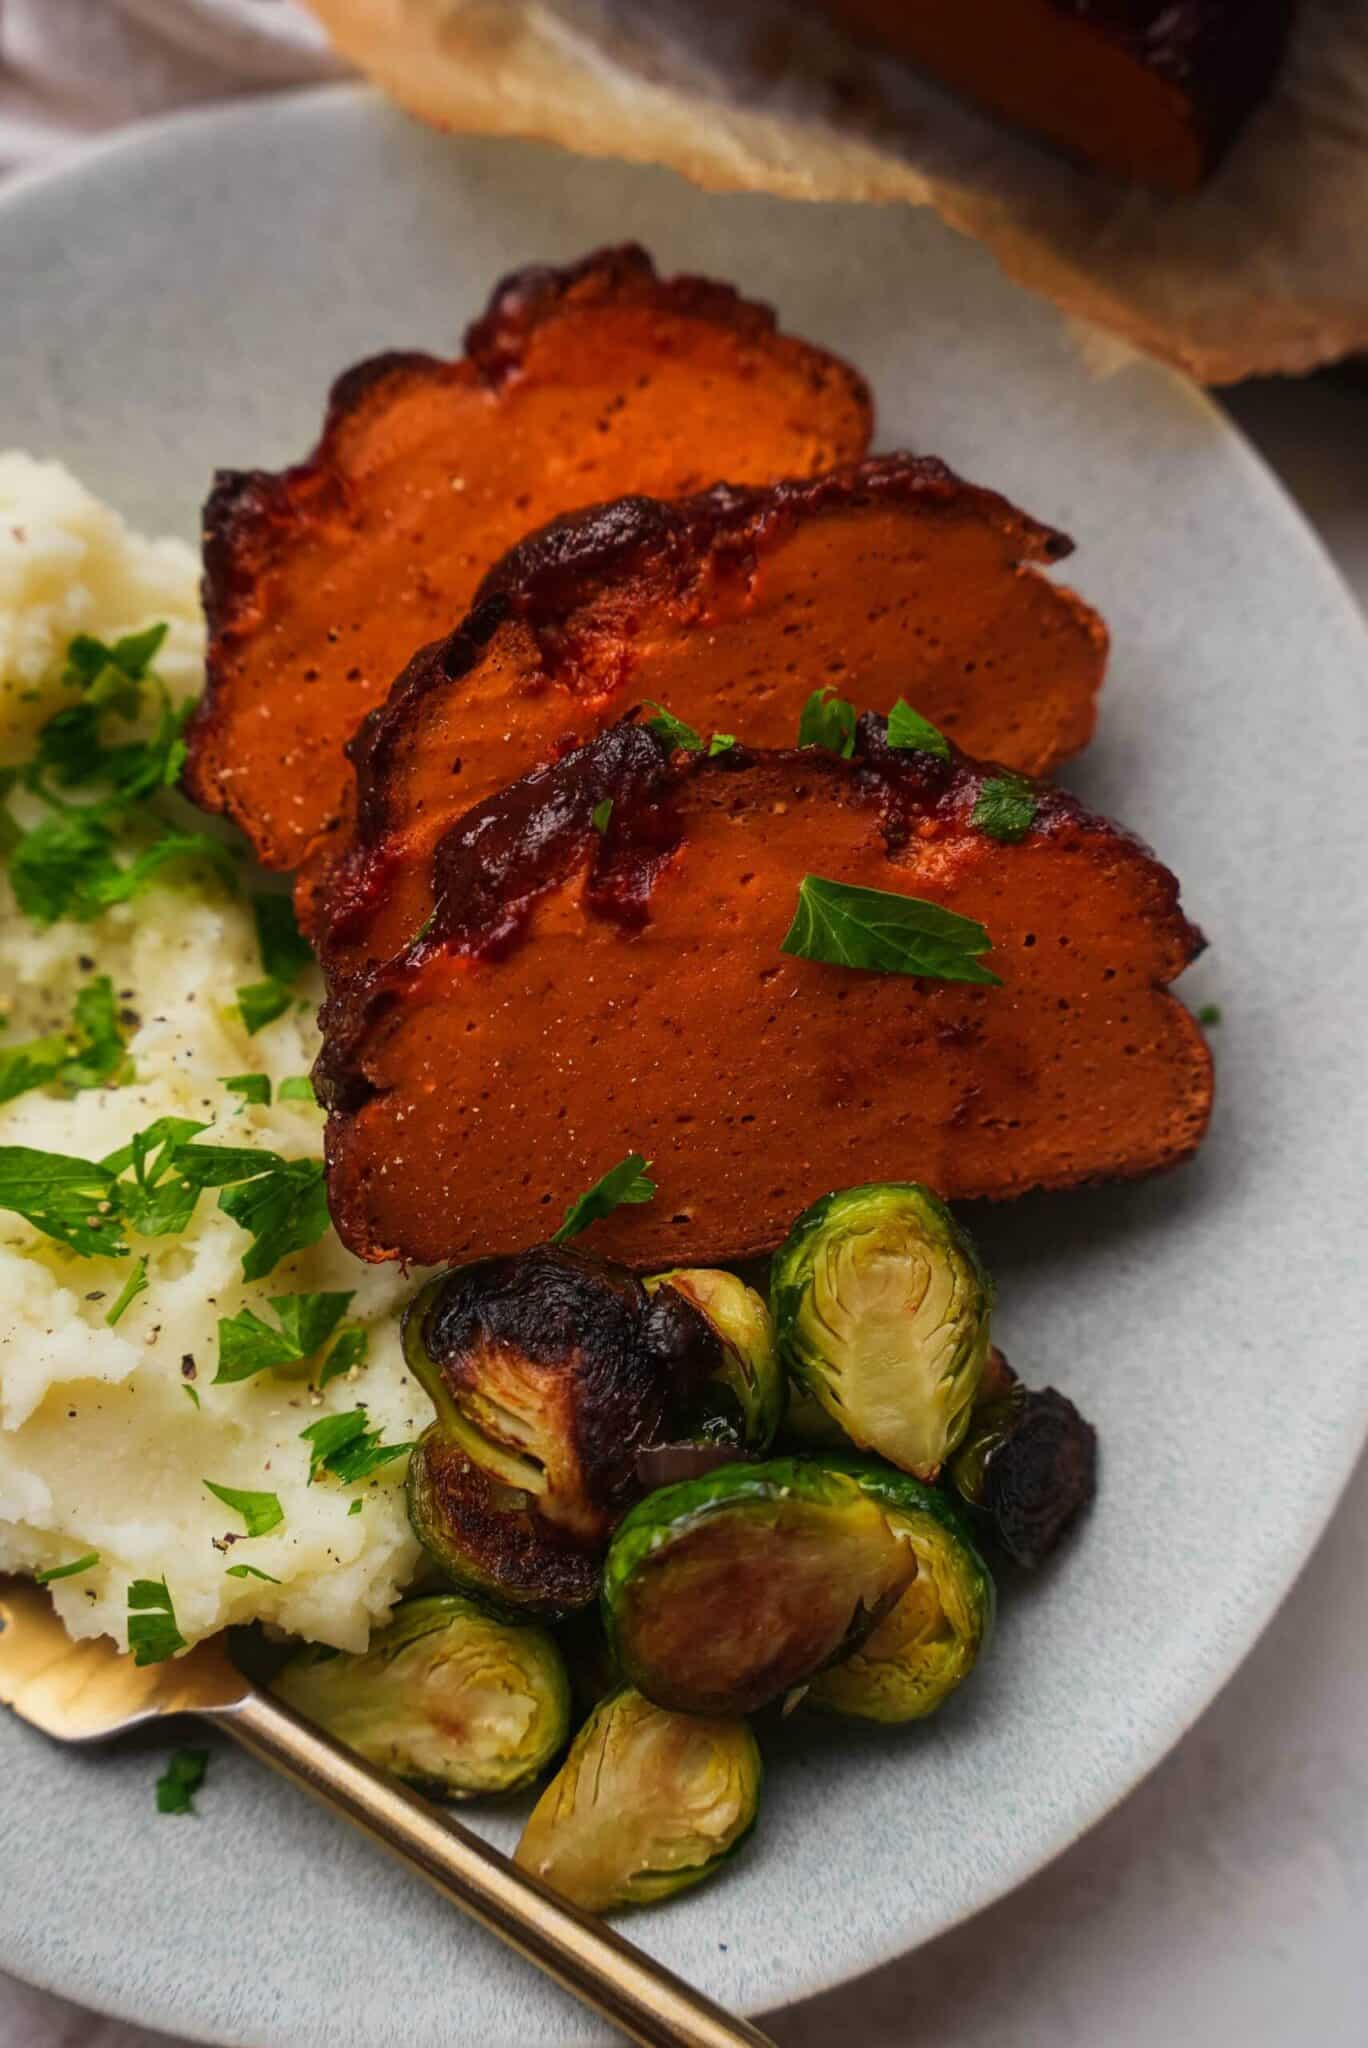 https://ohmyveggies.com/wp-content/uploads/2021/10/Vegan-ham-on-a-plate-with-mashed-potatoes-and-Brussels-sprouts-scaled-1-scaled.jpg